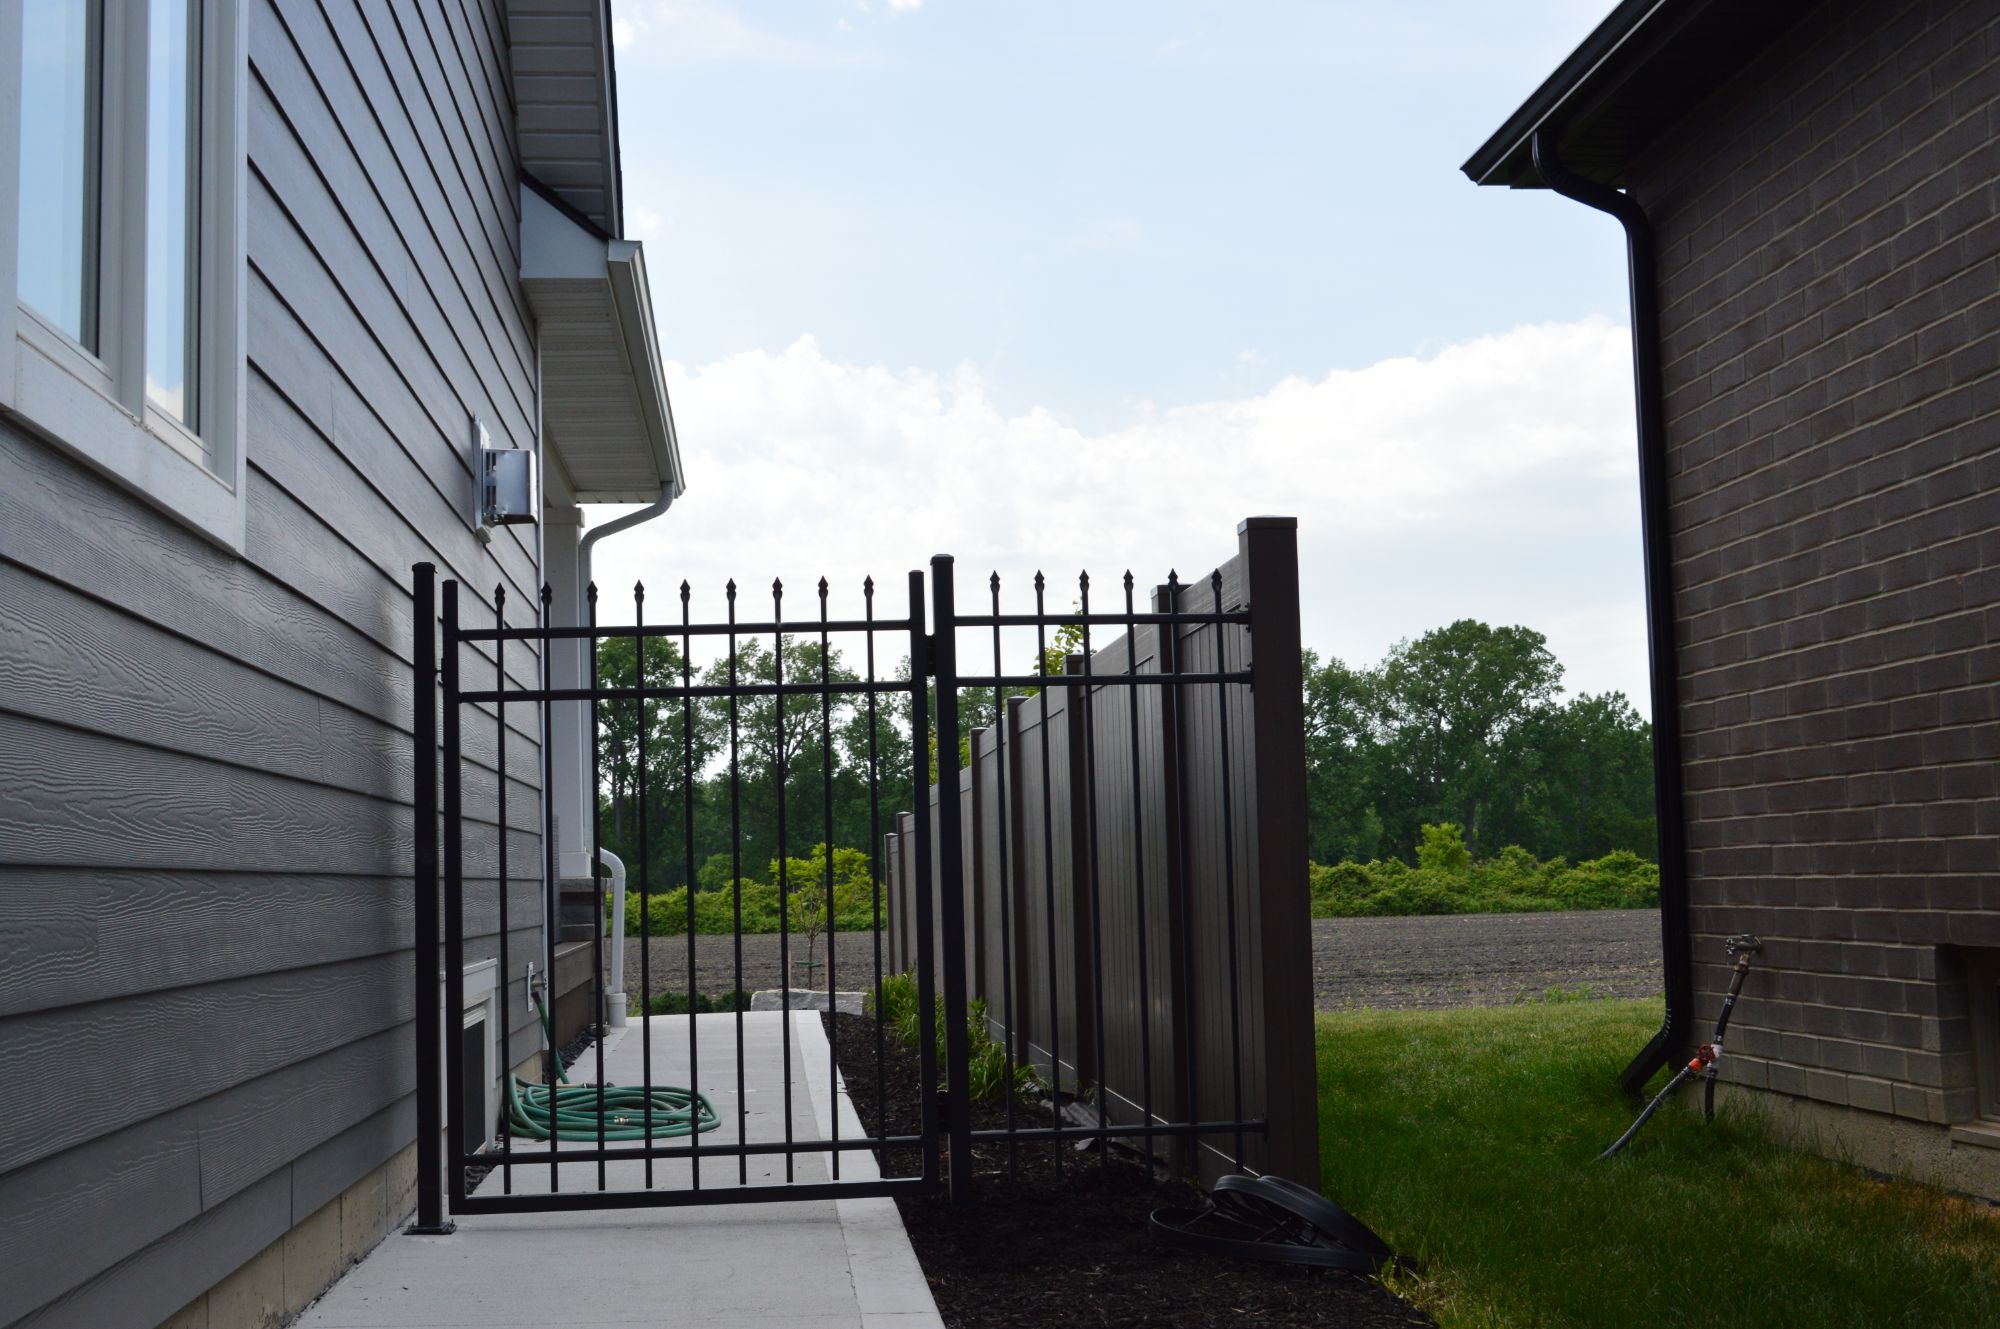 Spear point aluminum gate closing off this side walk at a new build in Windsor